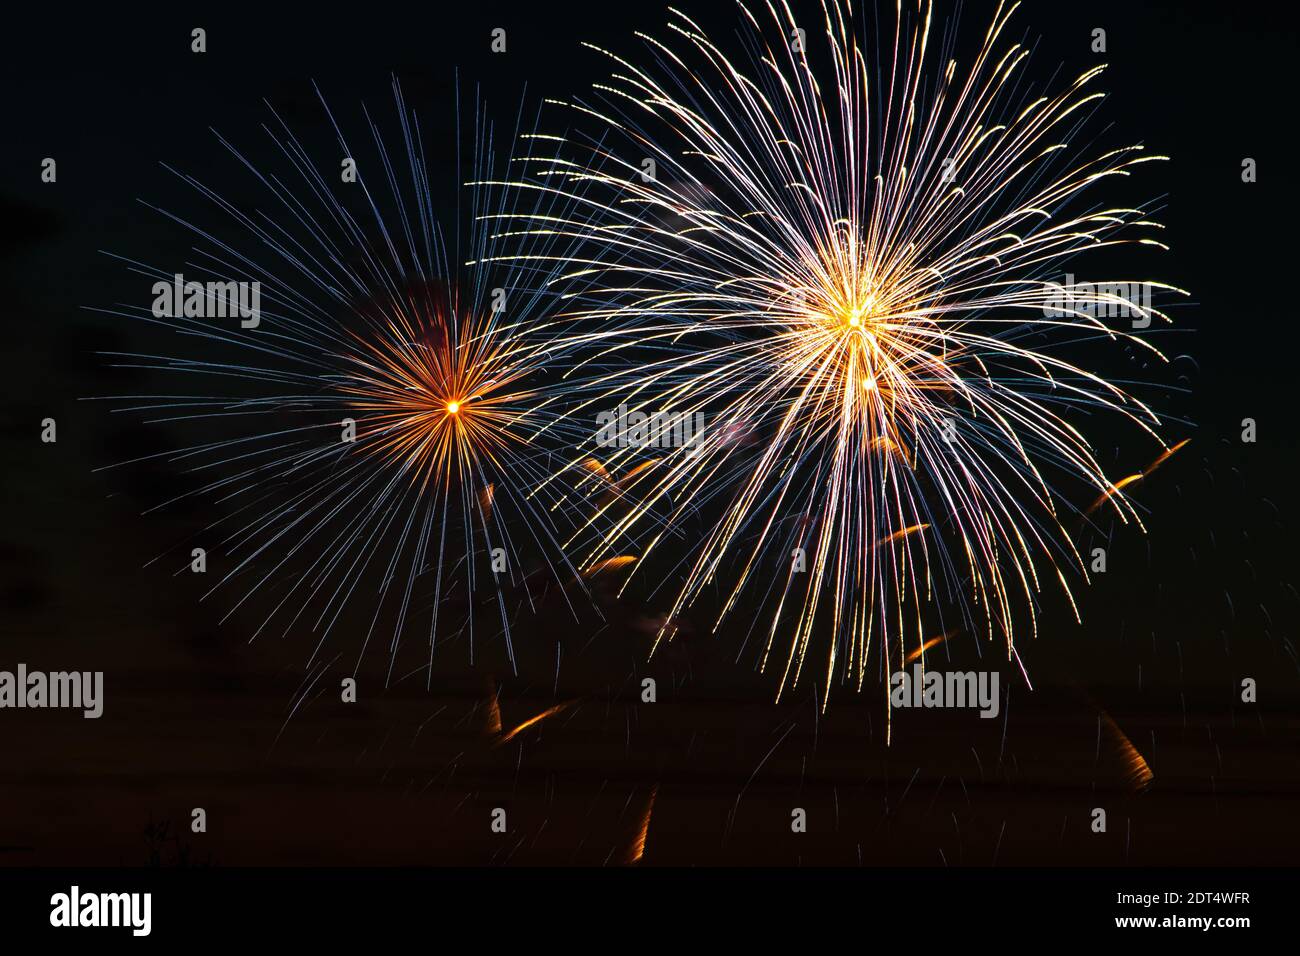 Beautiful festive fireworks in the night sky. Bright multi-colored salute on a black background. Place for text. Stock Photo